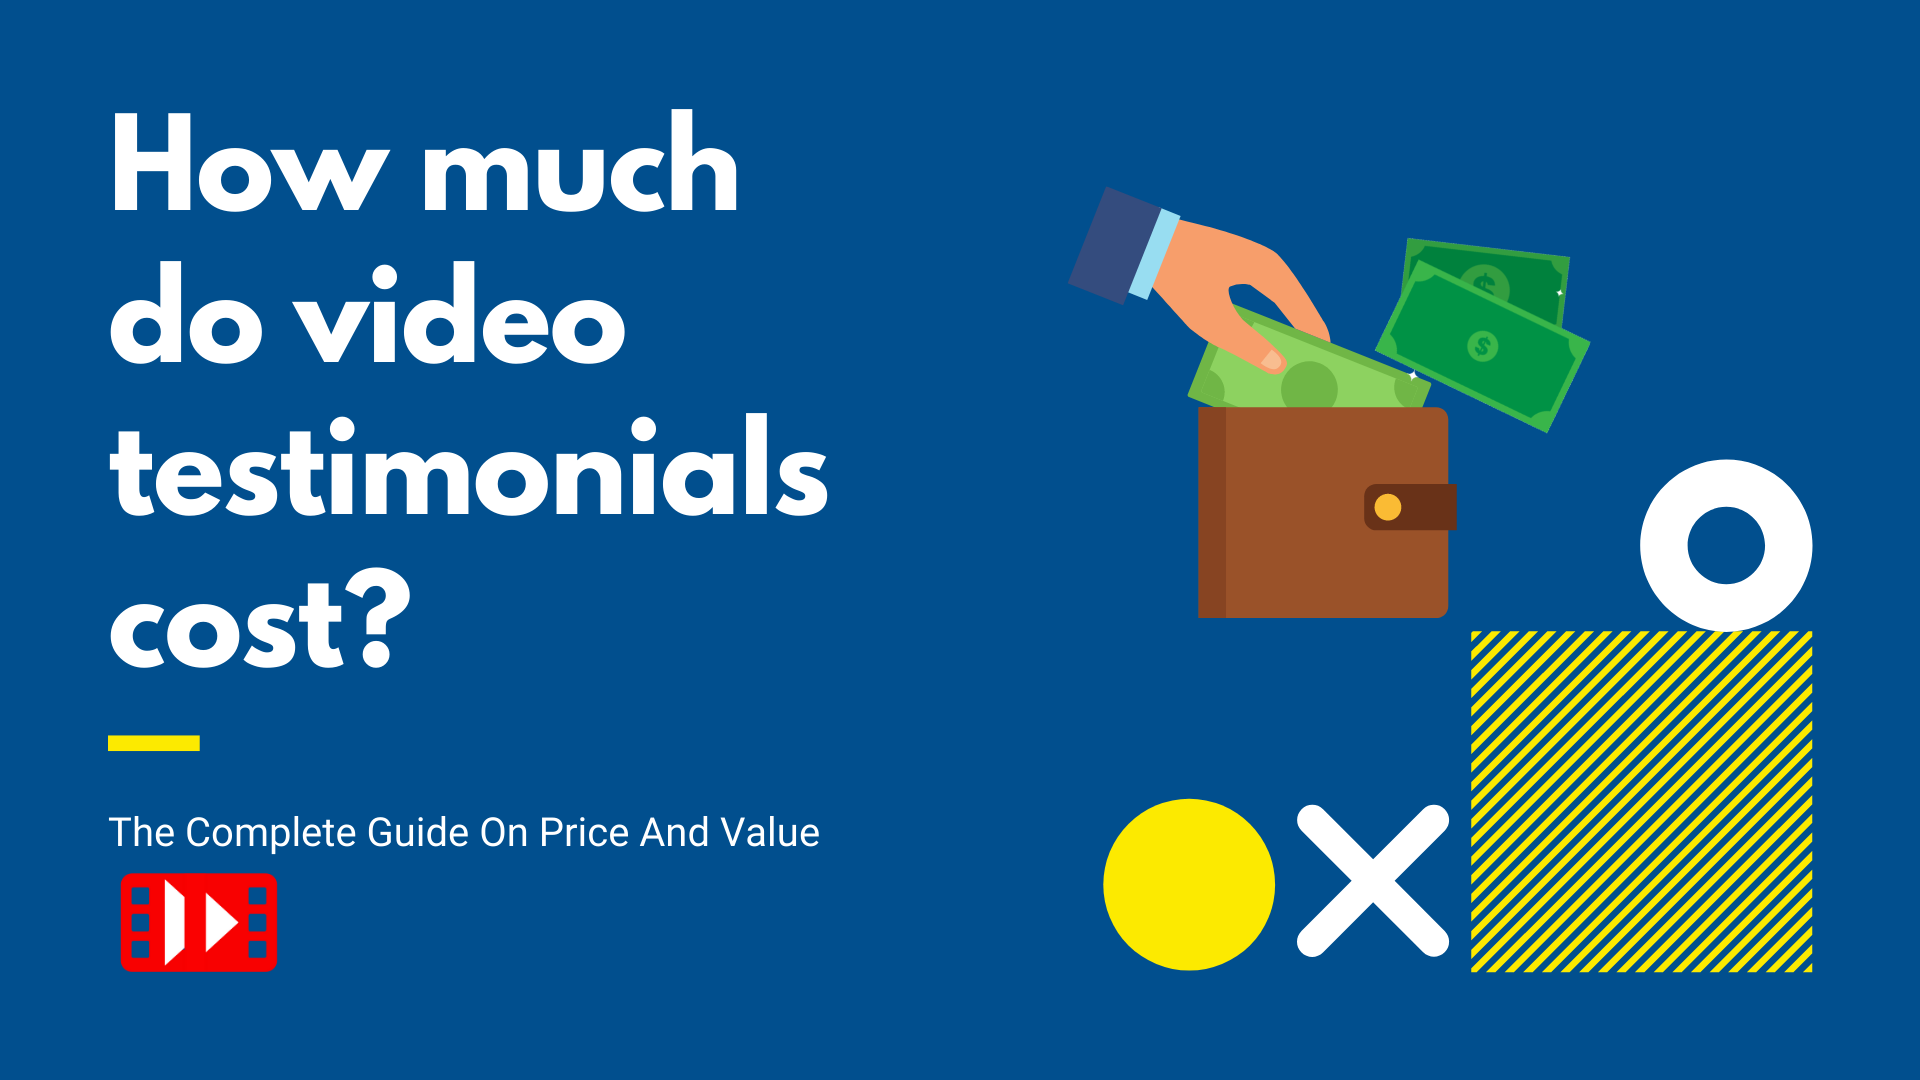 Video Testimonial Cost: How Much Should You Pay?